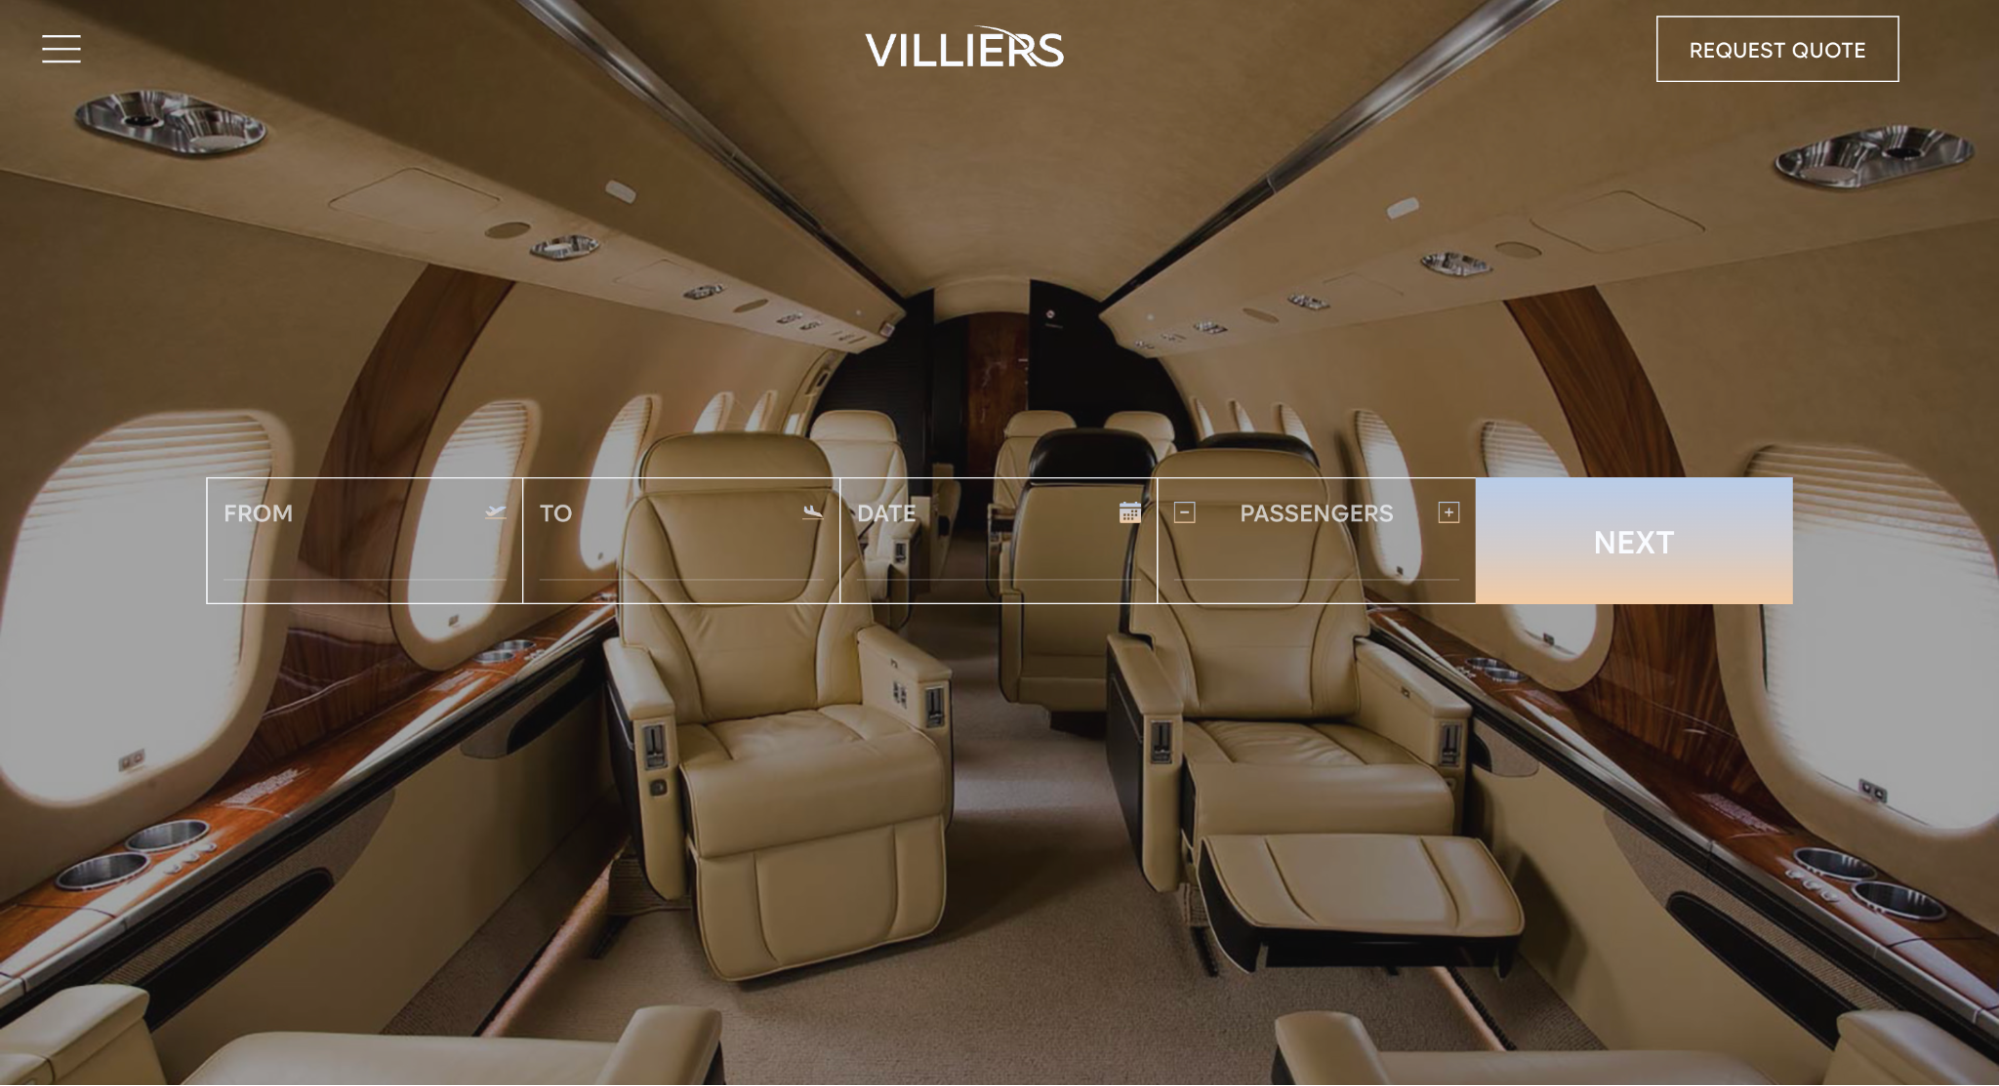 Villiers homepage with a search bar and background image showing a private jet interior.